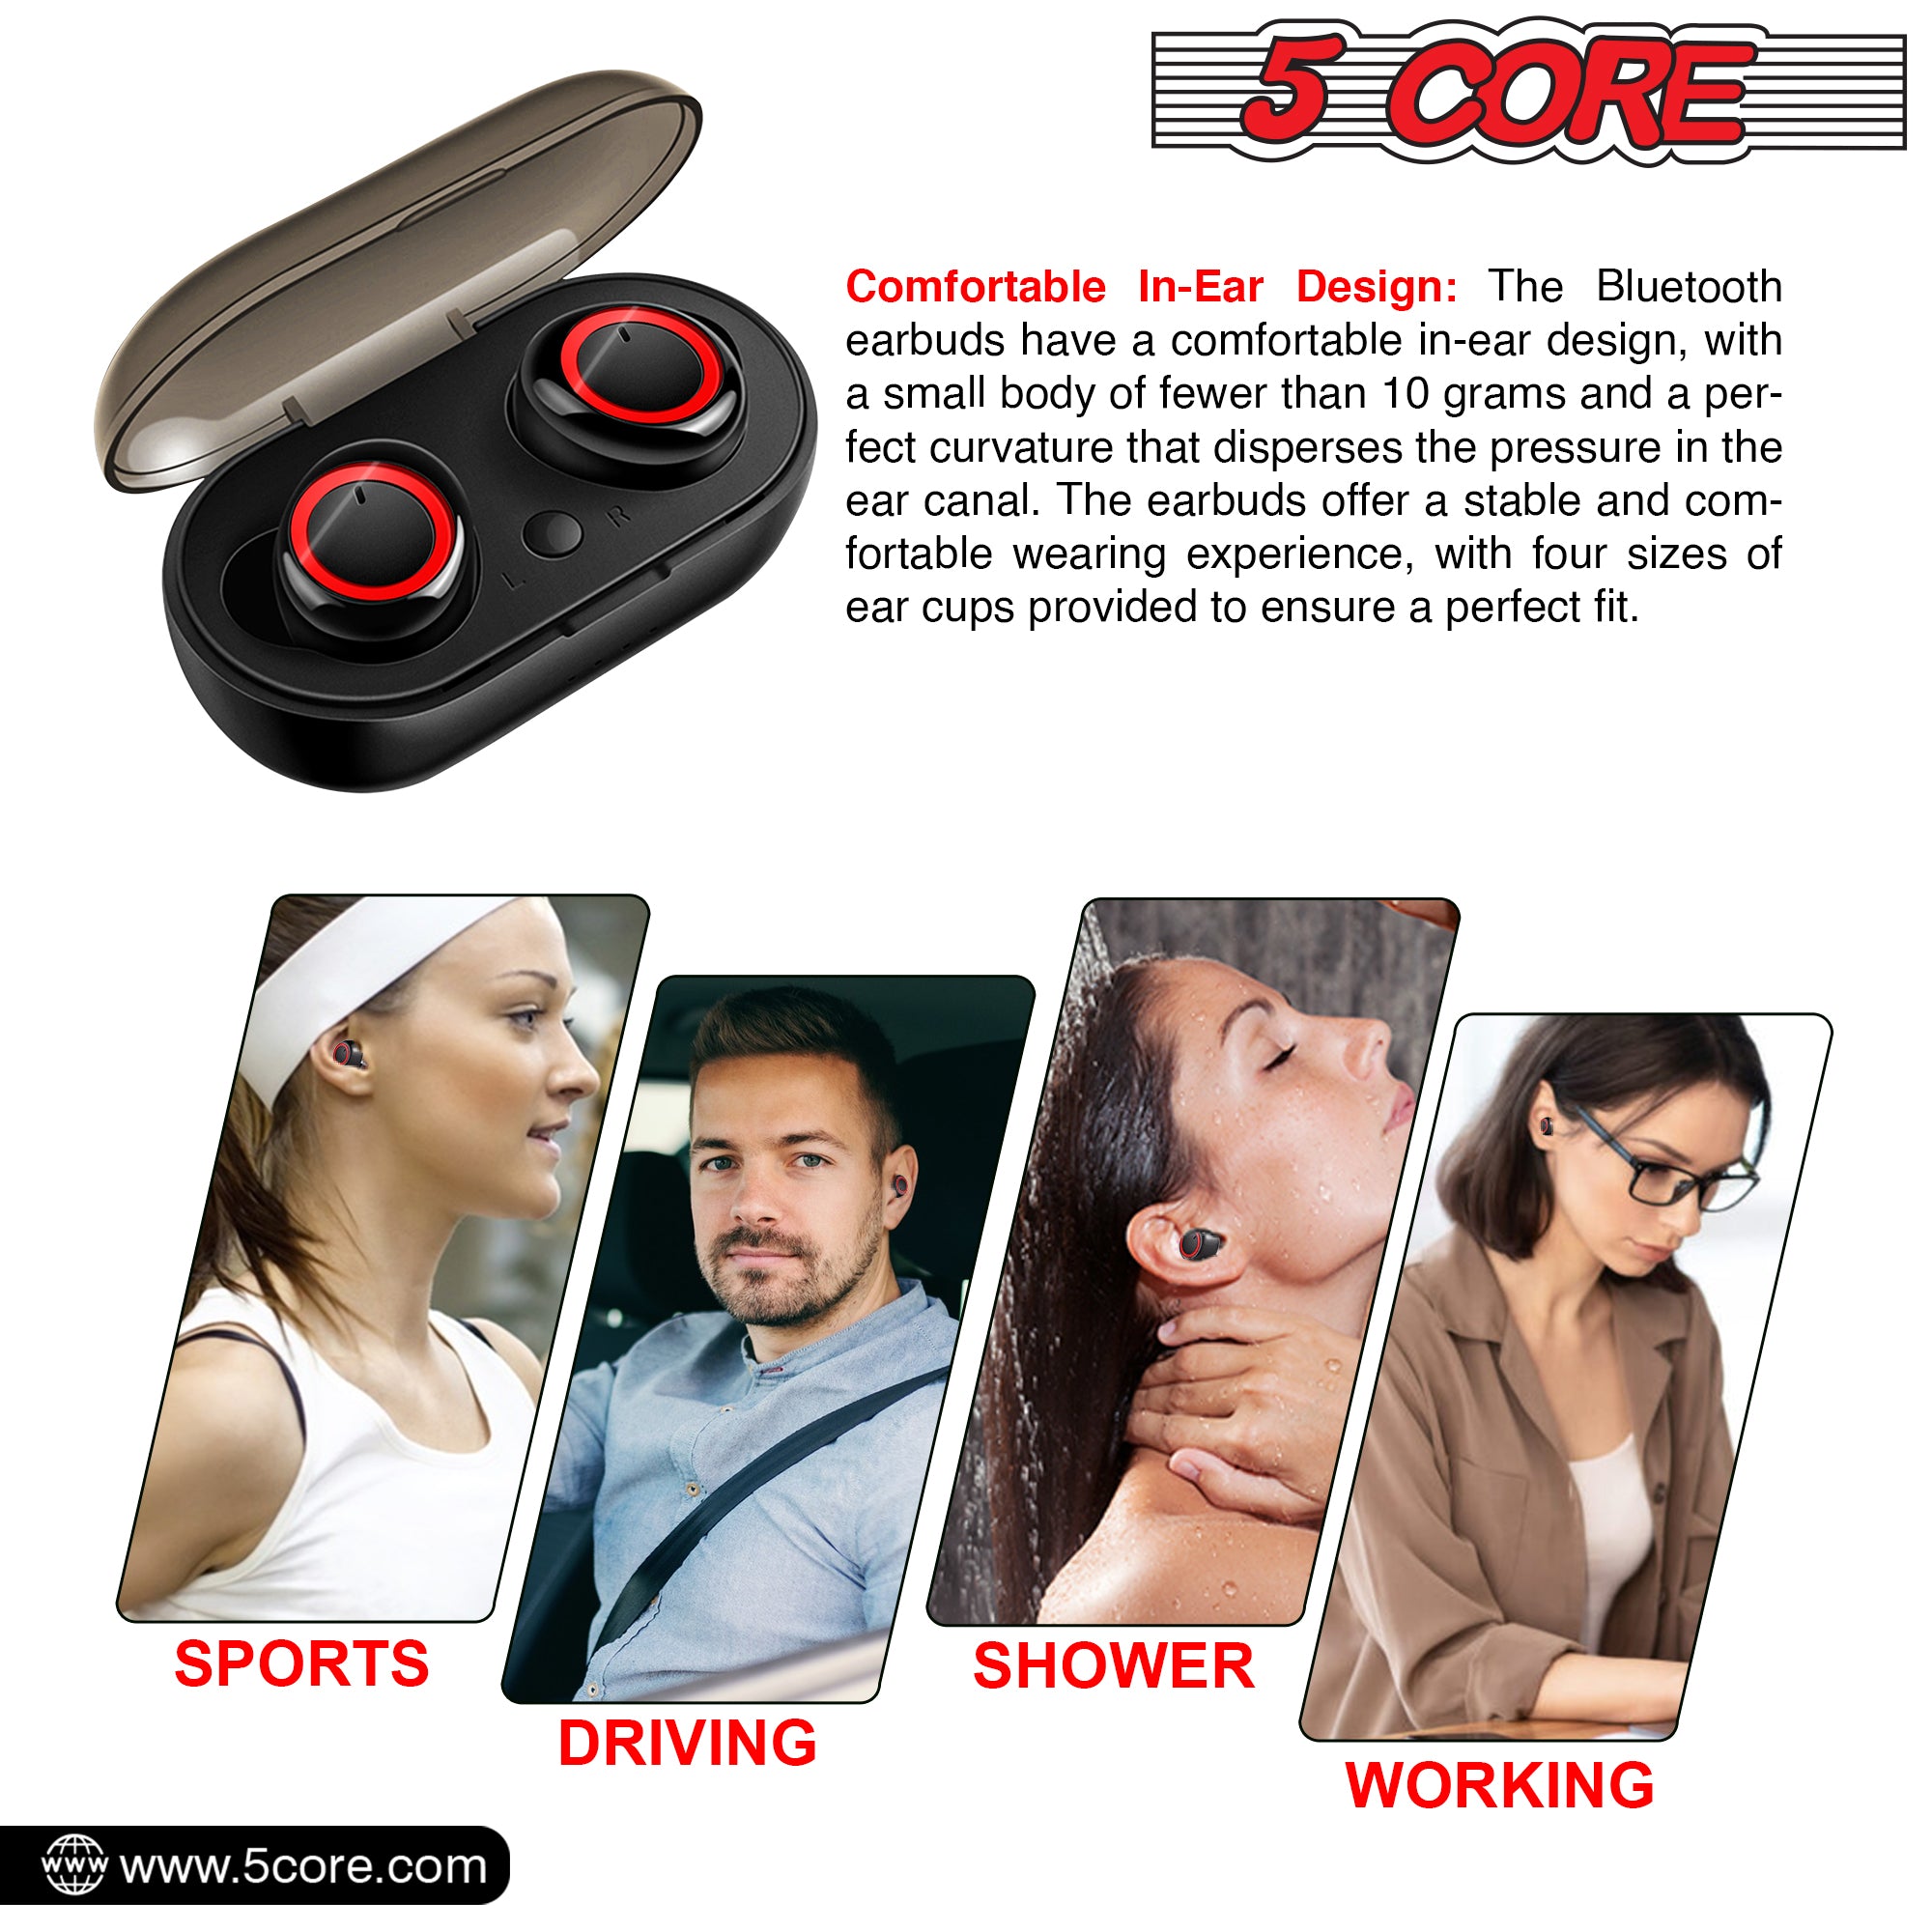 Ergonomic Design: Comfortable and Secure Fit Earbuds